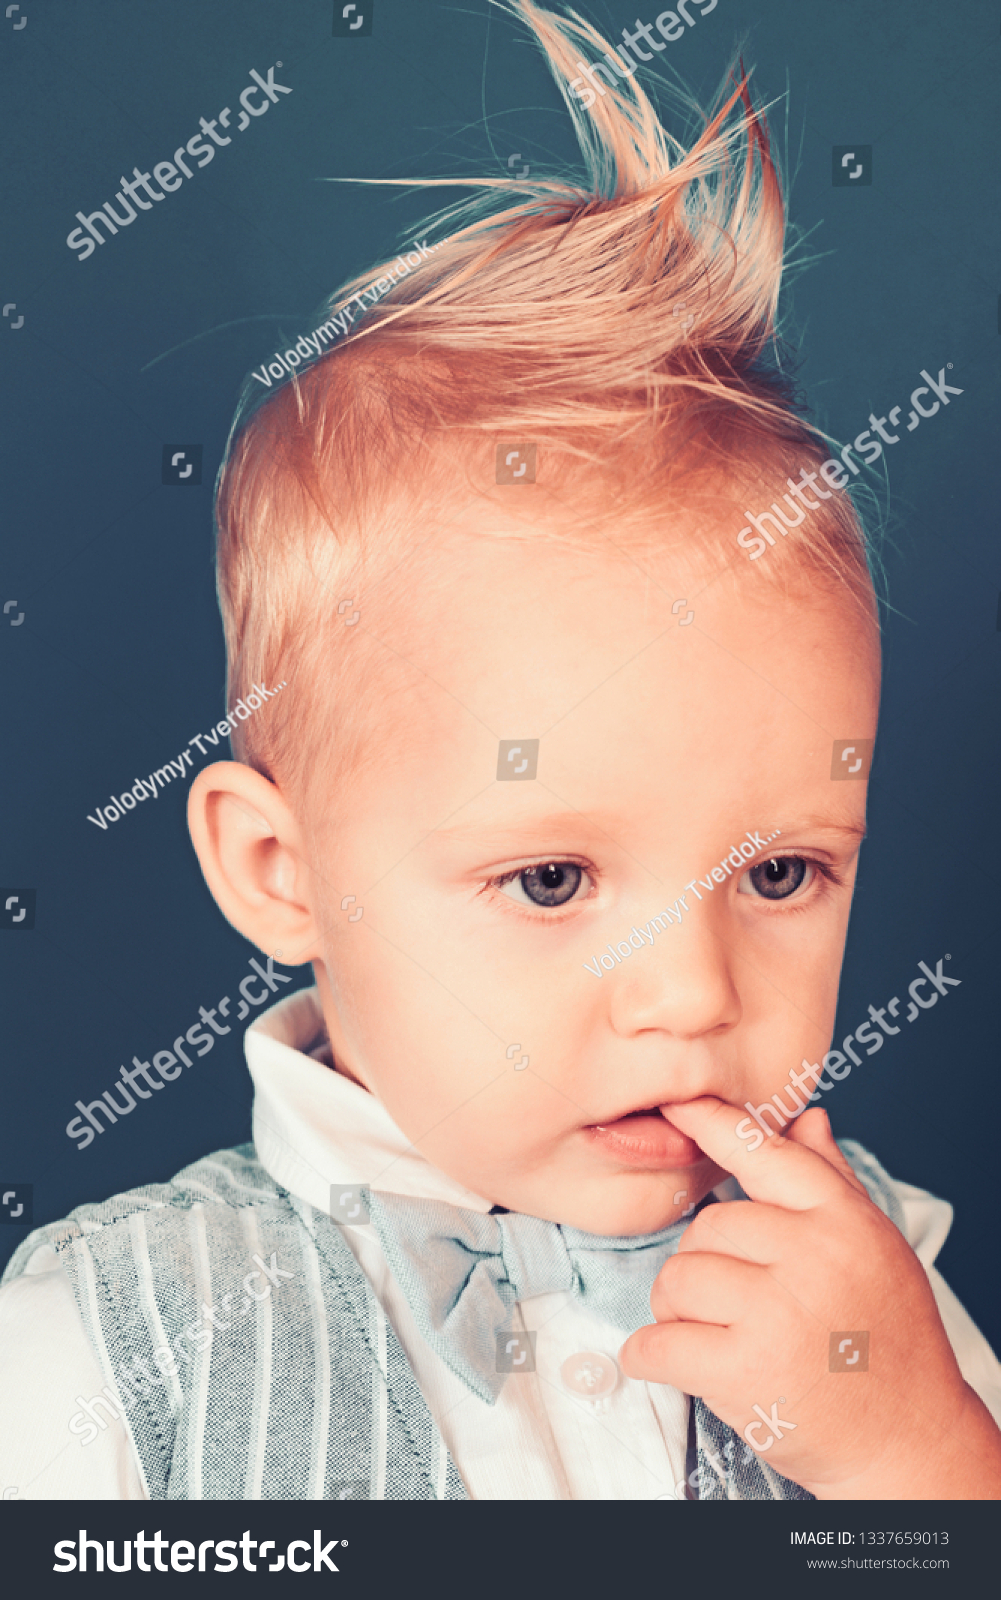 Healthy Hair Care Habits Small Child Stock Photo Edit Now 1337659013